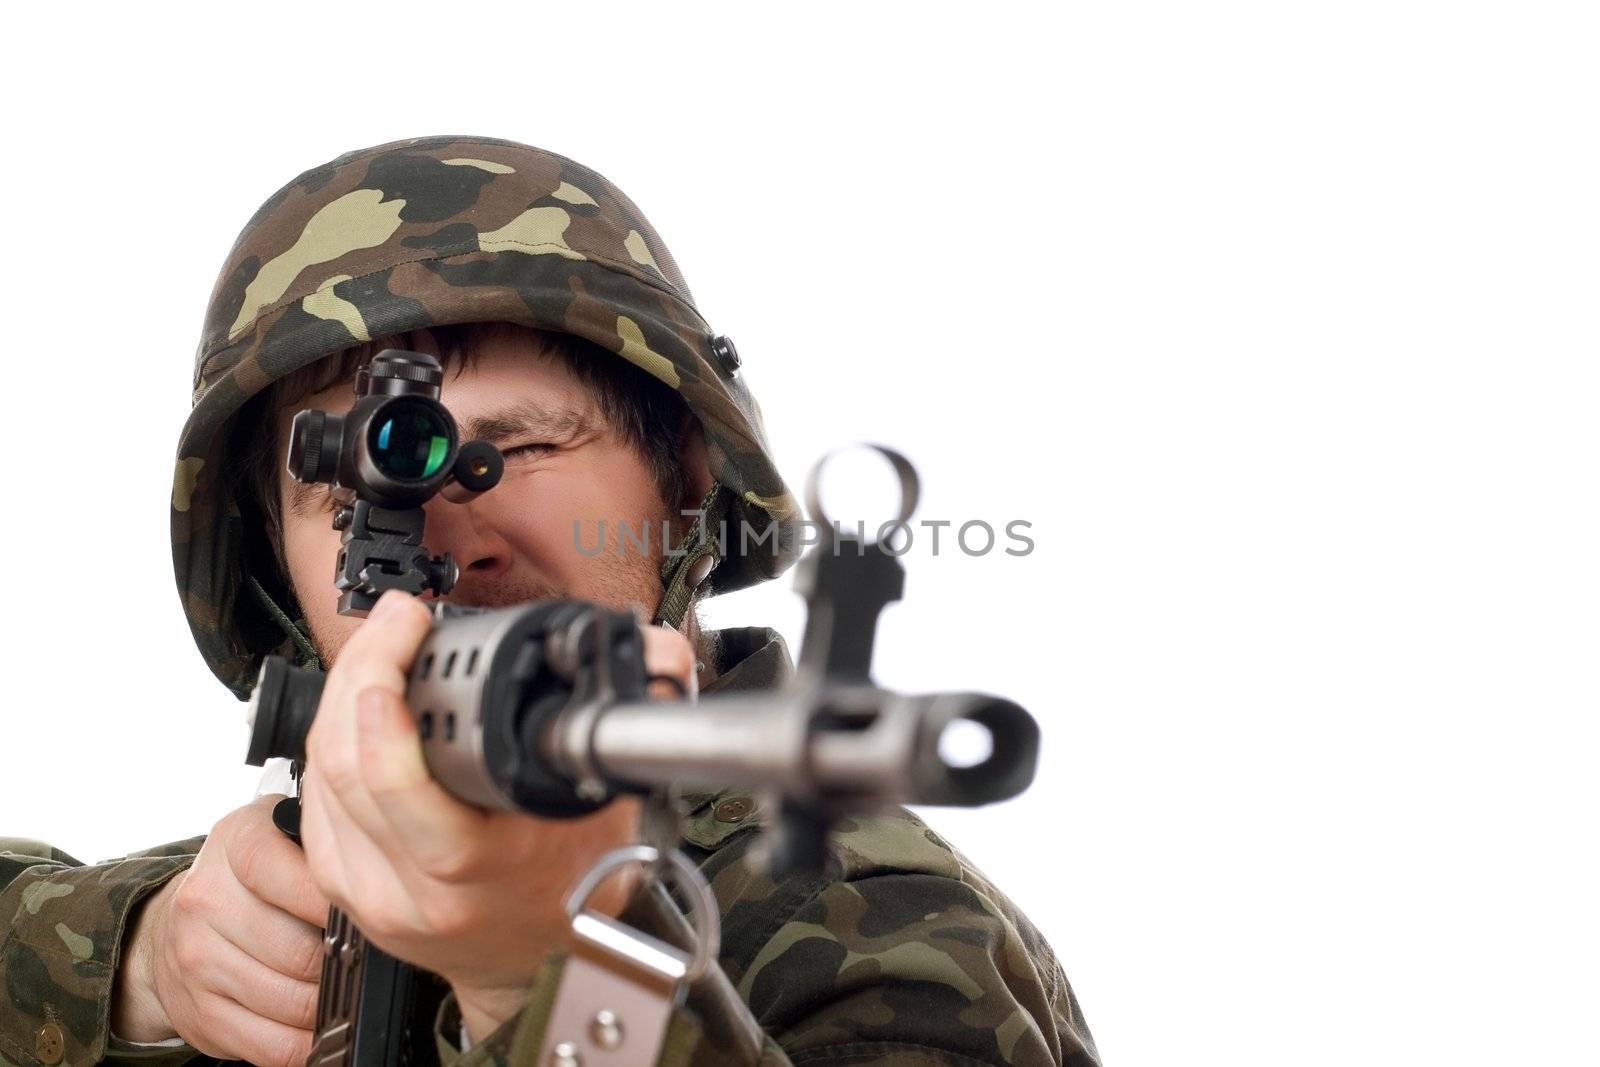 Soldier aiming a rifle in studio. Isolated